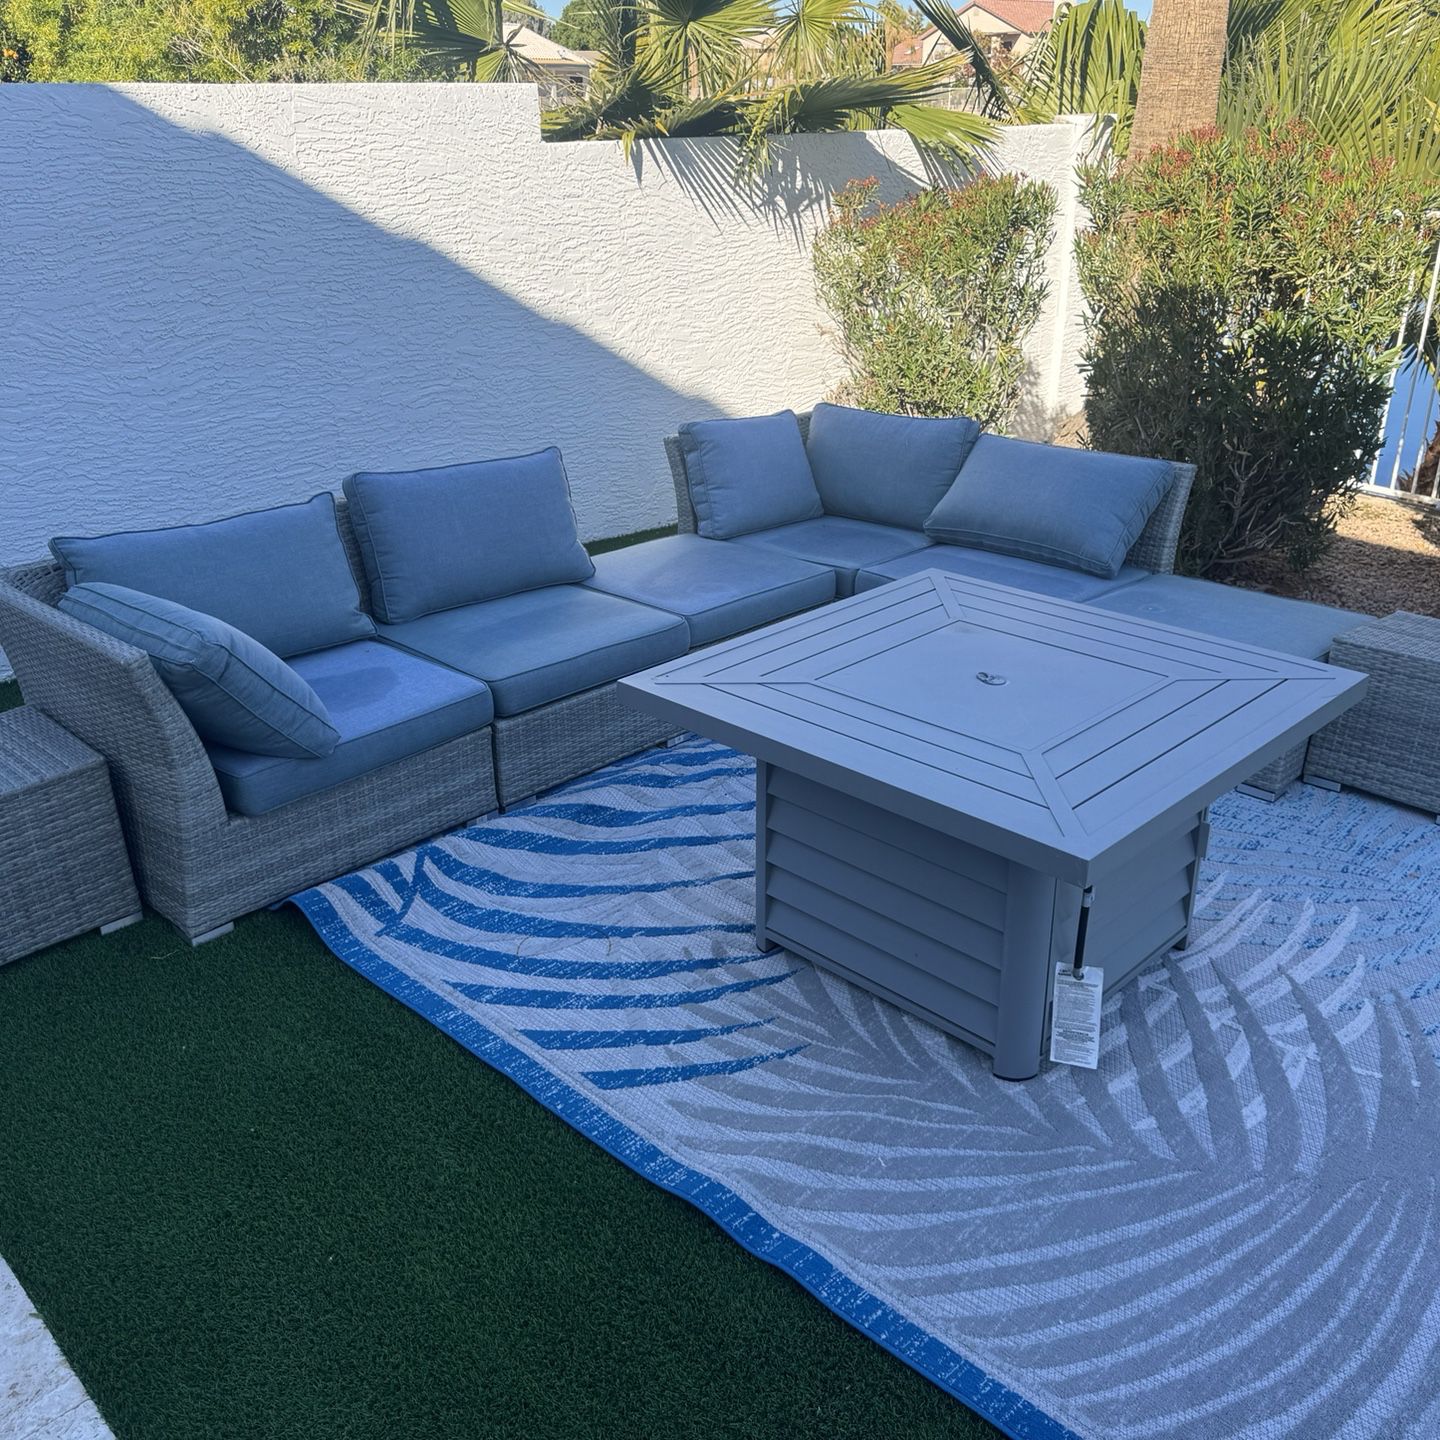 Sectional Patio Furniture with Fire Pit & Rug